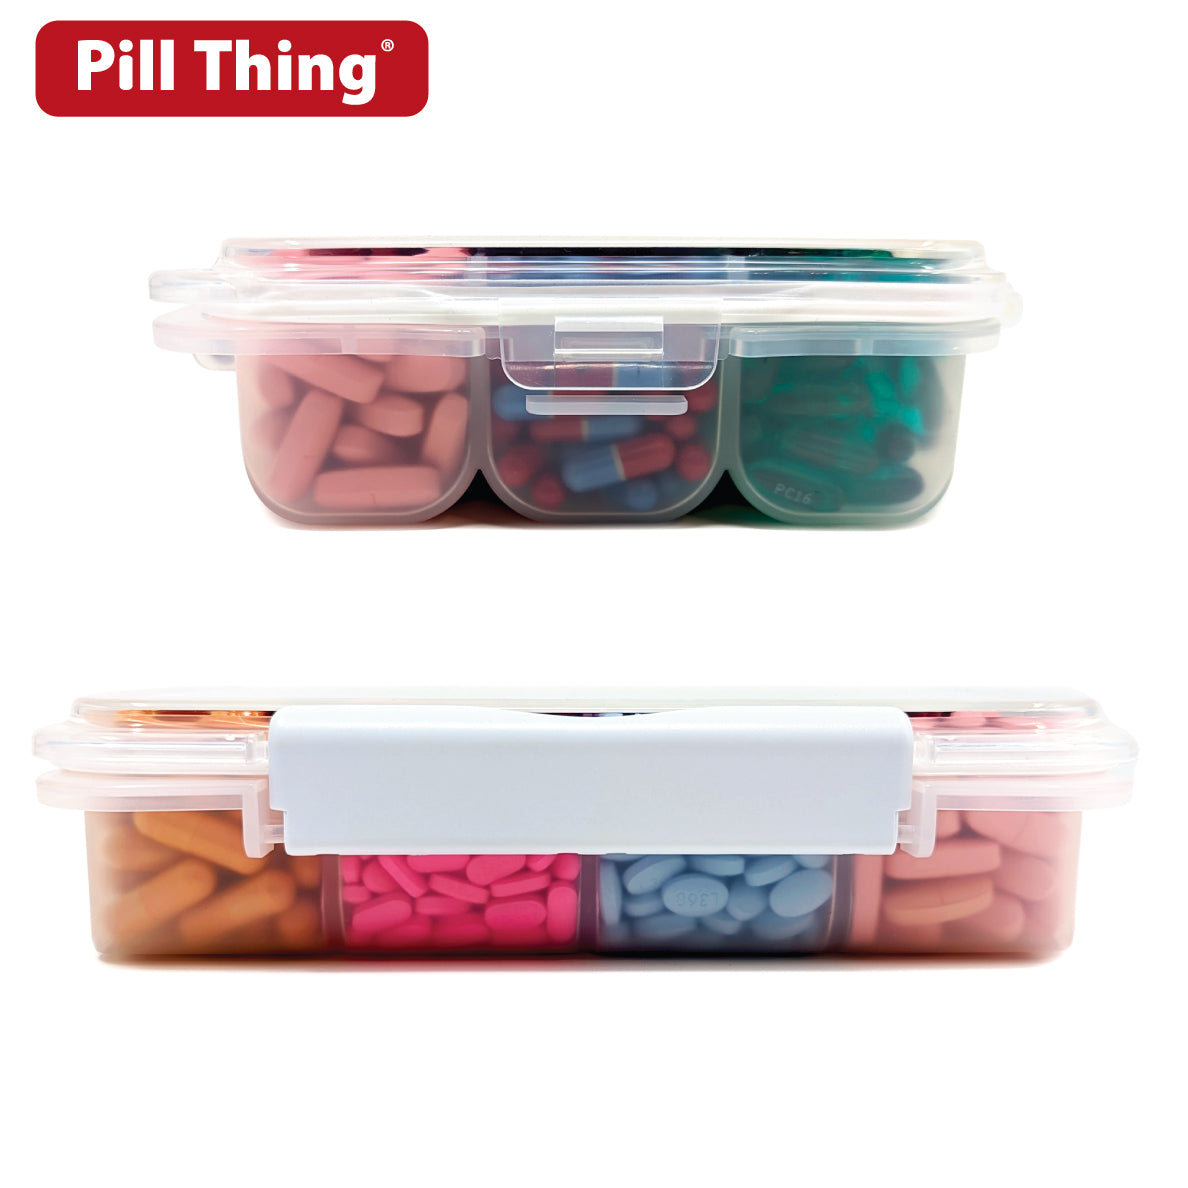 GMS Gasketed 7-Day 3-Times-a-Day Pill Organizer for Vitamins